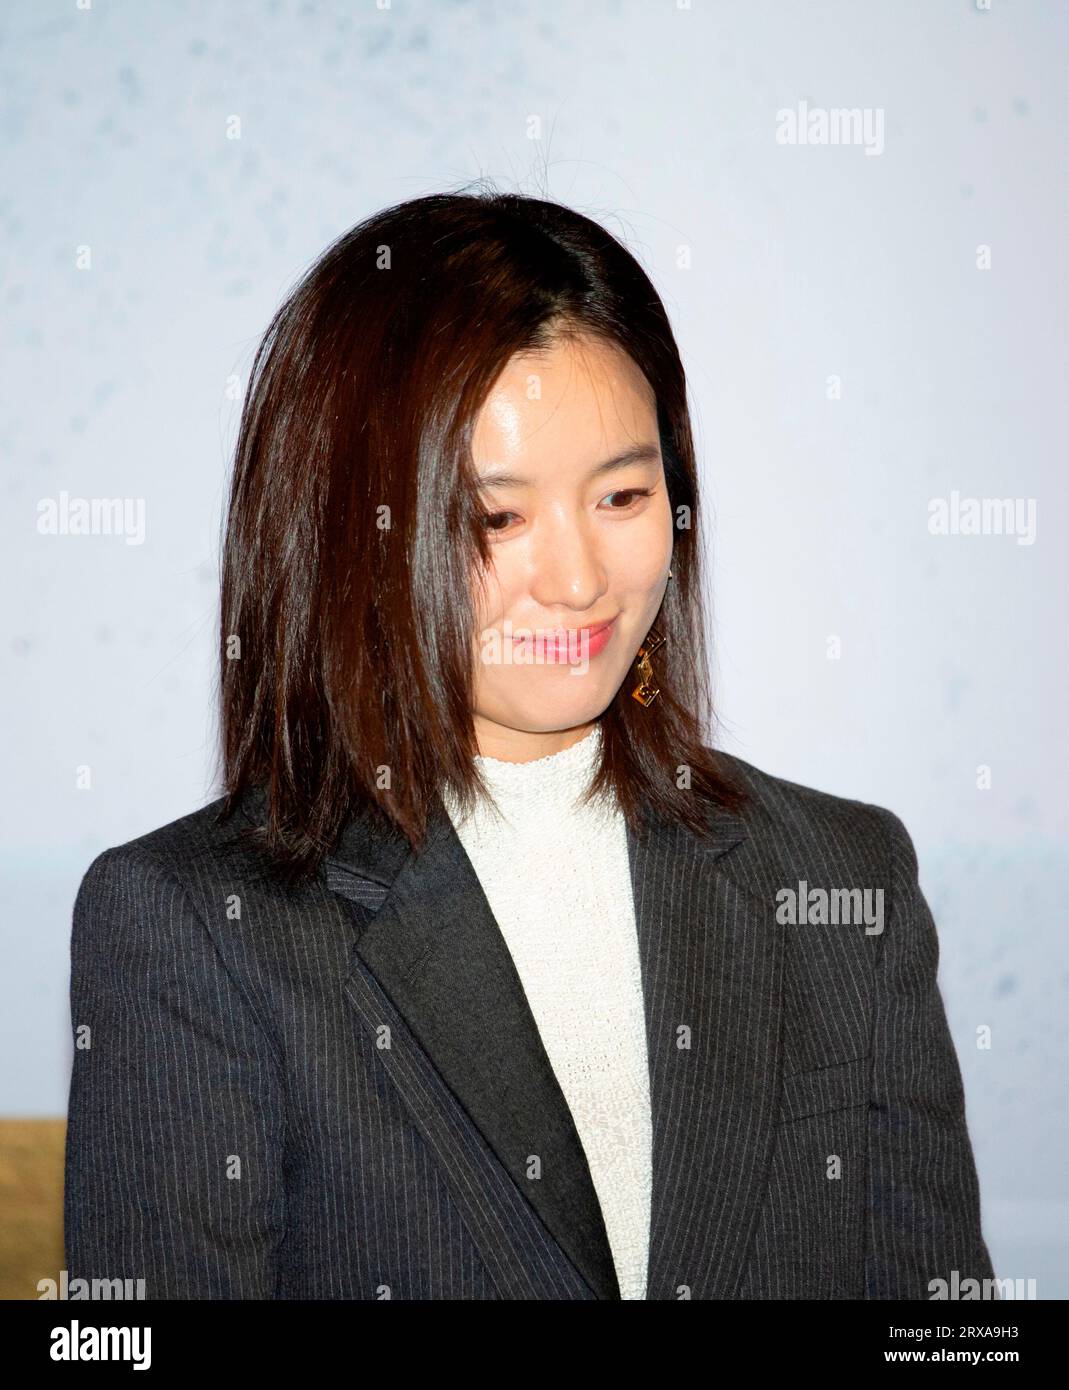 Han Hyo-Joo, September 20, 2023 : Cast member of the Disney  original drama series 'Moving', Han Hyo-Joo attends a stage greeting before the last three episodes of the drama are screened for fans at a cinema in Seoul, South Korea. The sci-fi action series 'Moving' features a group of superpowered individuals who hide their true abilities from the world in order to protect their families from danger. The 20-episode series is based on a hit webtoon by Kang Full. Credit: Lee Jae-Won/AFLO/Alamy Live News Stock Photo